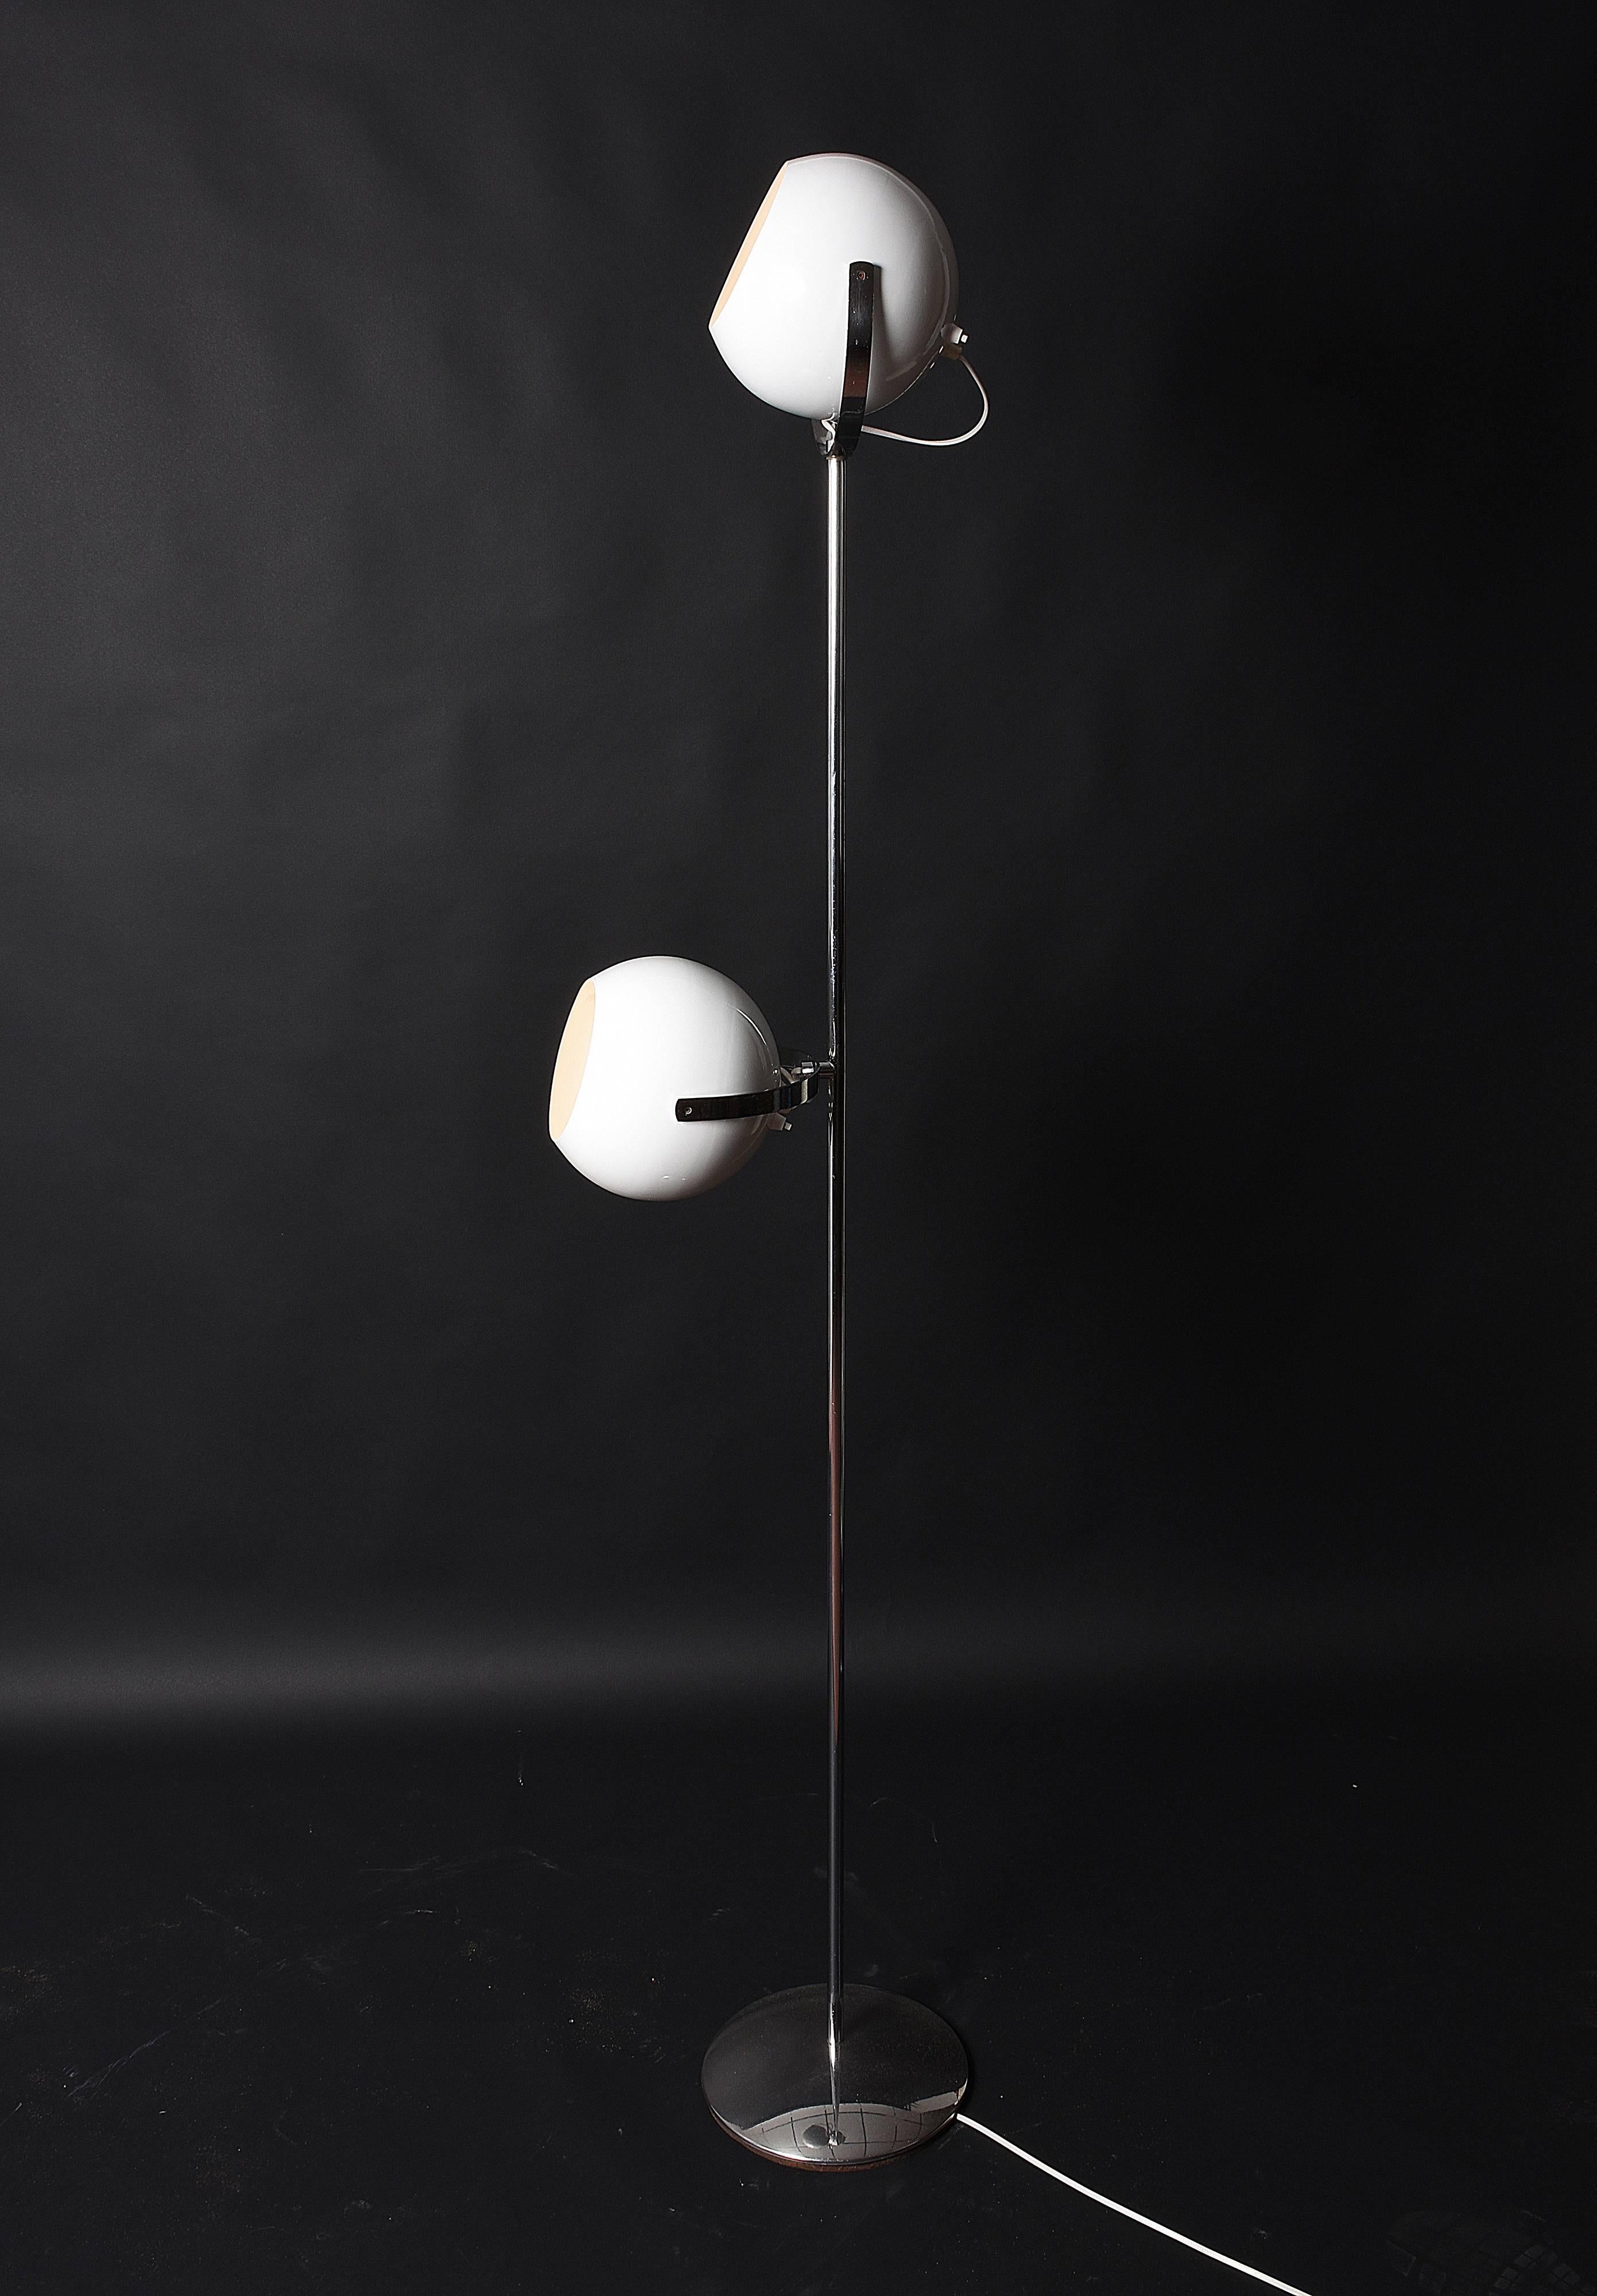 Designed by Reggiani, Space Age chrome-plated and white floor lamp with adjustable spheres, Italy, 1970s.